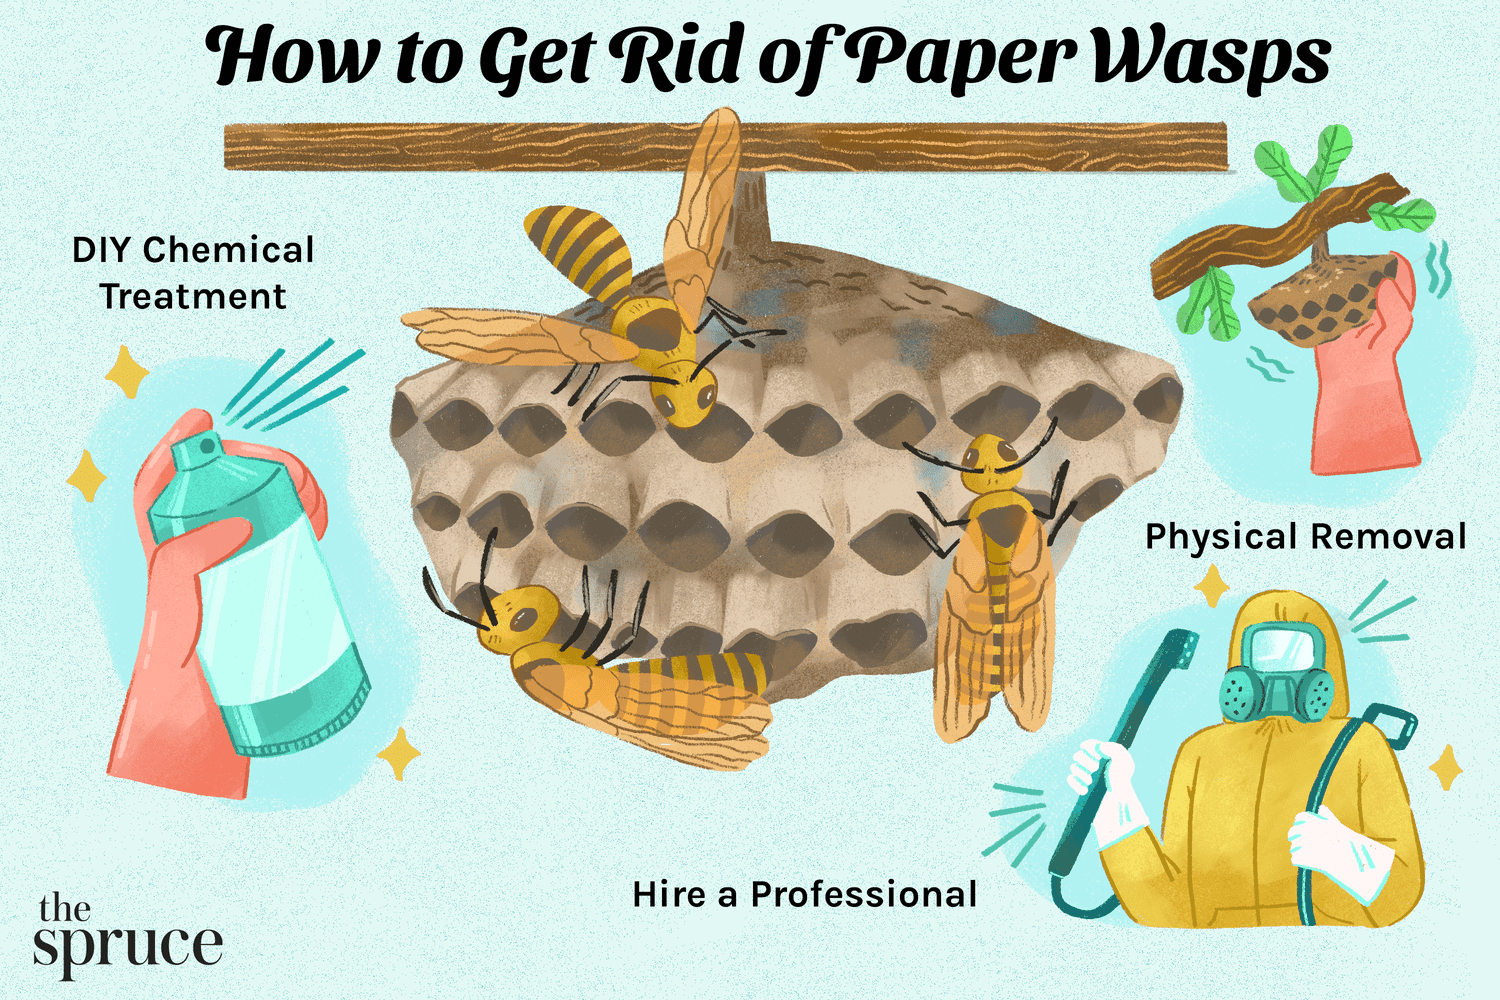 3. Make your own wasp trap